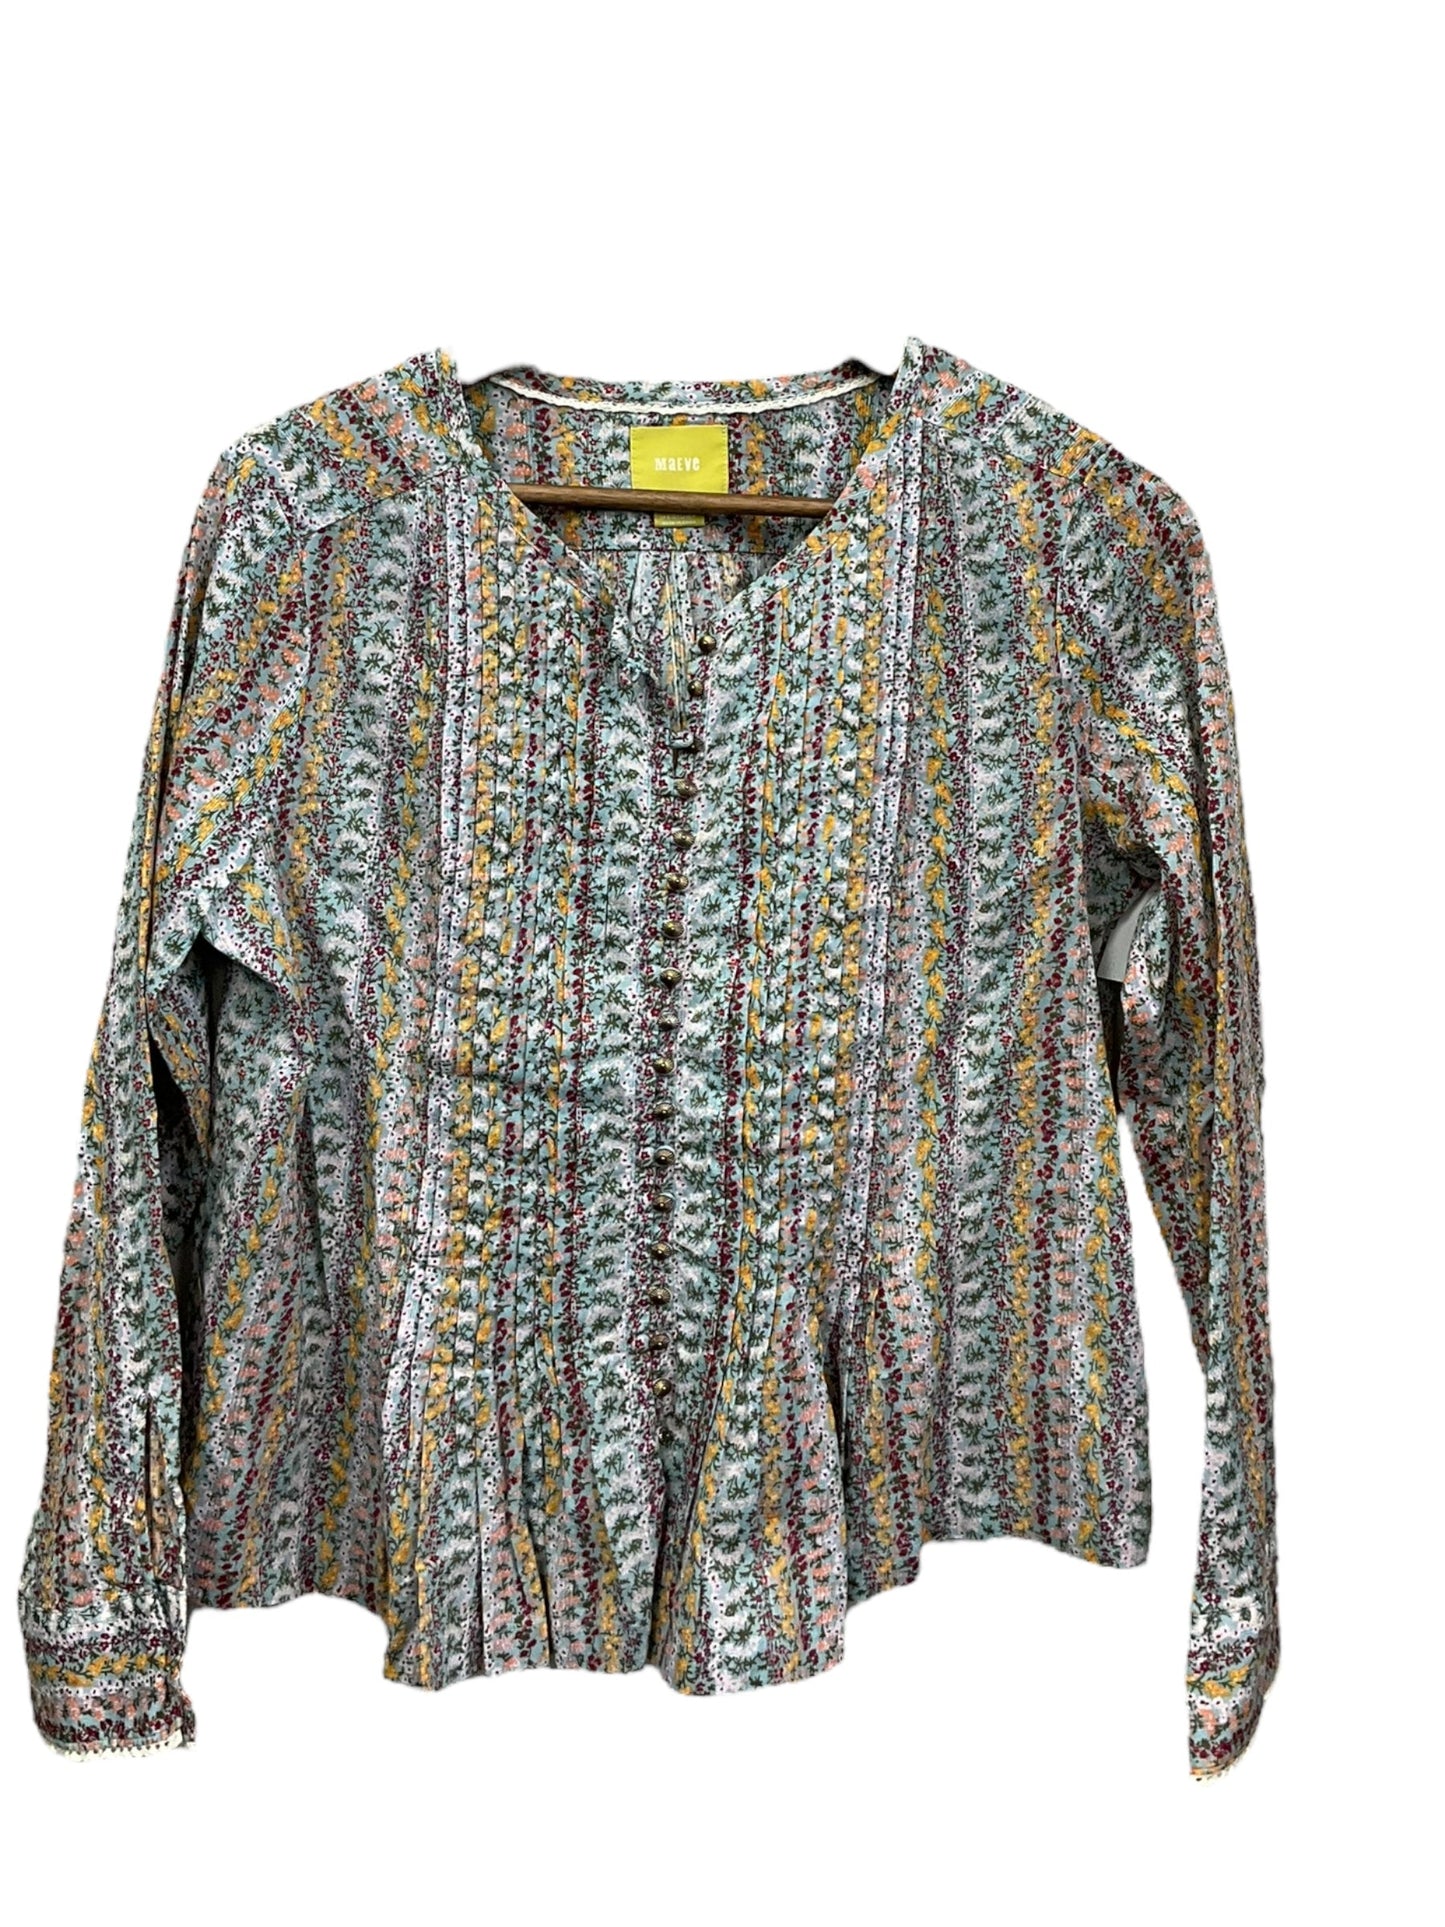 Multi-colored Top Long Sleeve Maeve, Size M